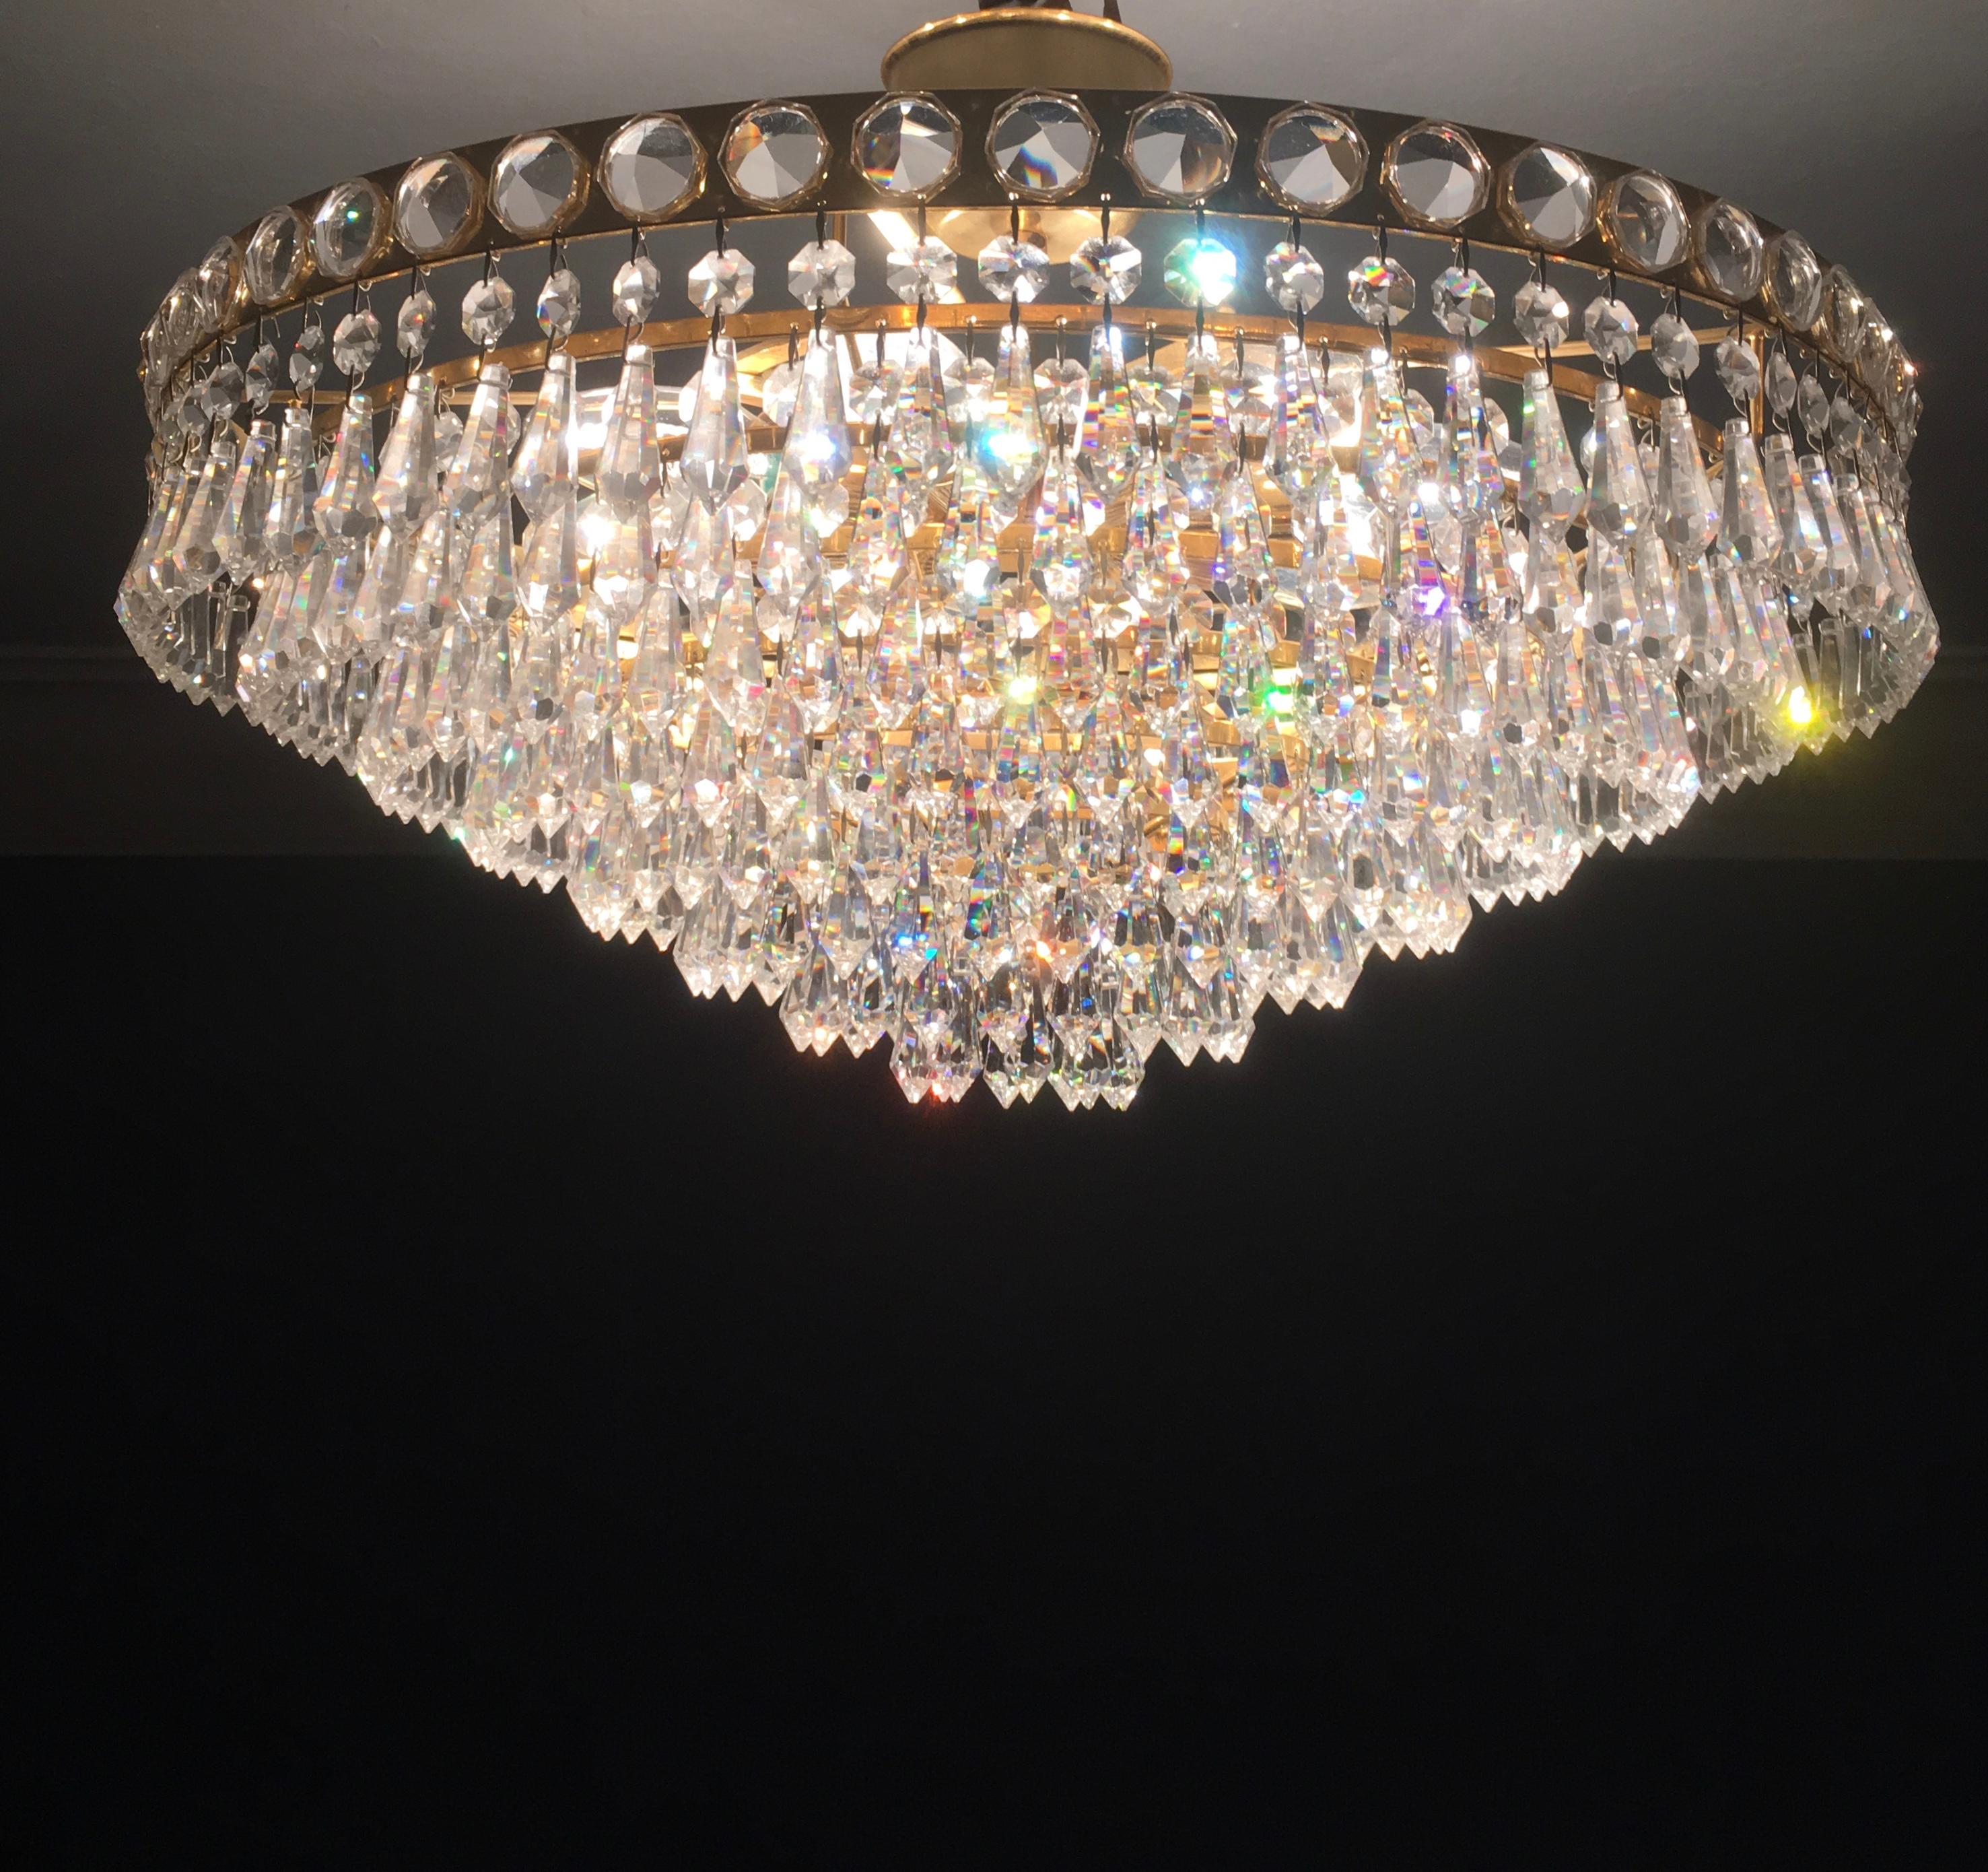 A 1970s strass/Swarovski, lead crystal - Chandelier by Joska, Bavarian Forrest, Germany.
The real and original Strass/Swarowski crystals have a minimum percentage of 24% lead, this leads to the
high quality, the brilliance and light color of this